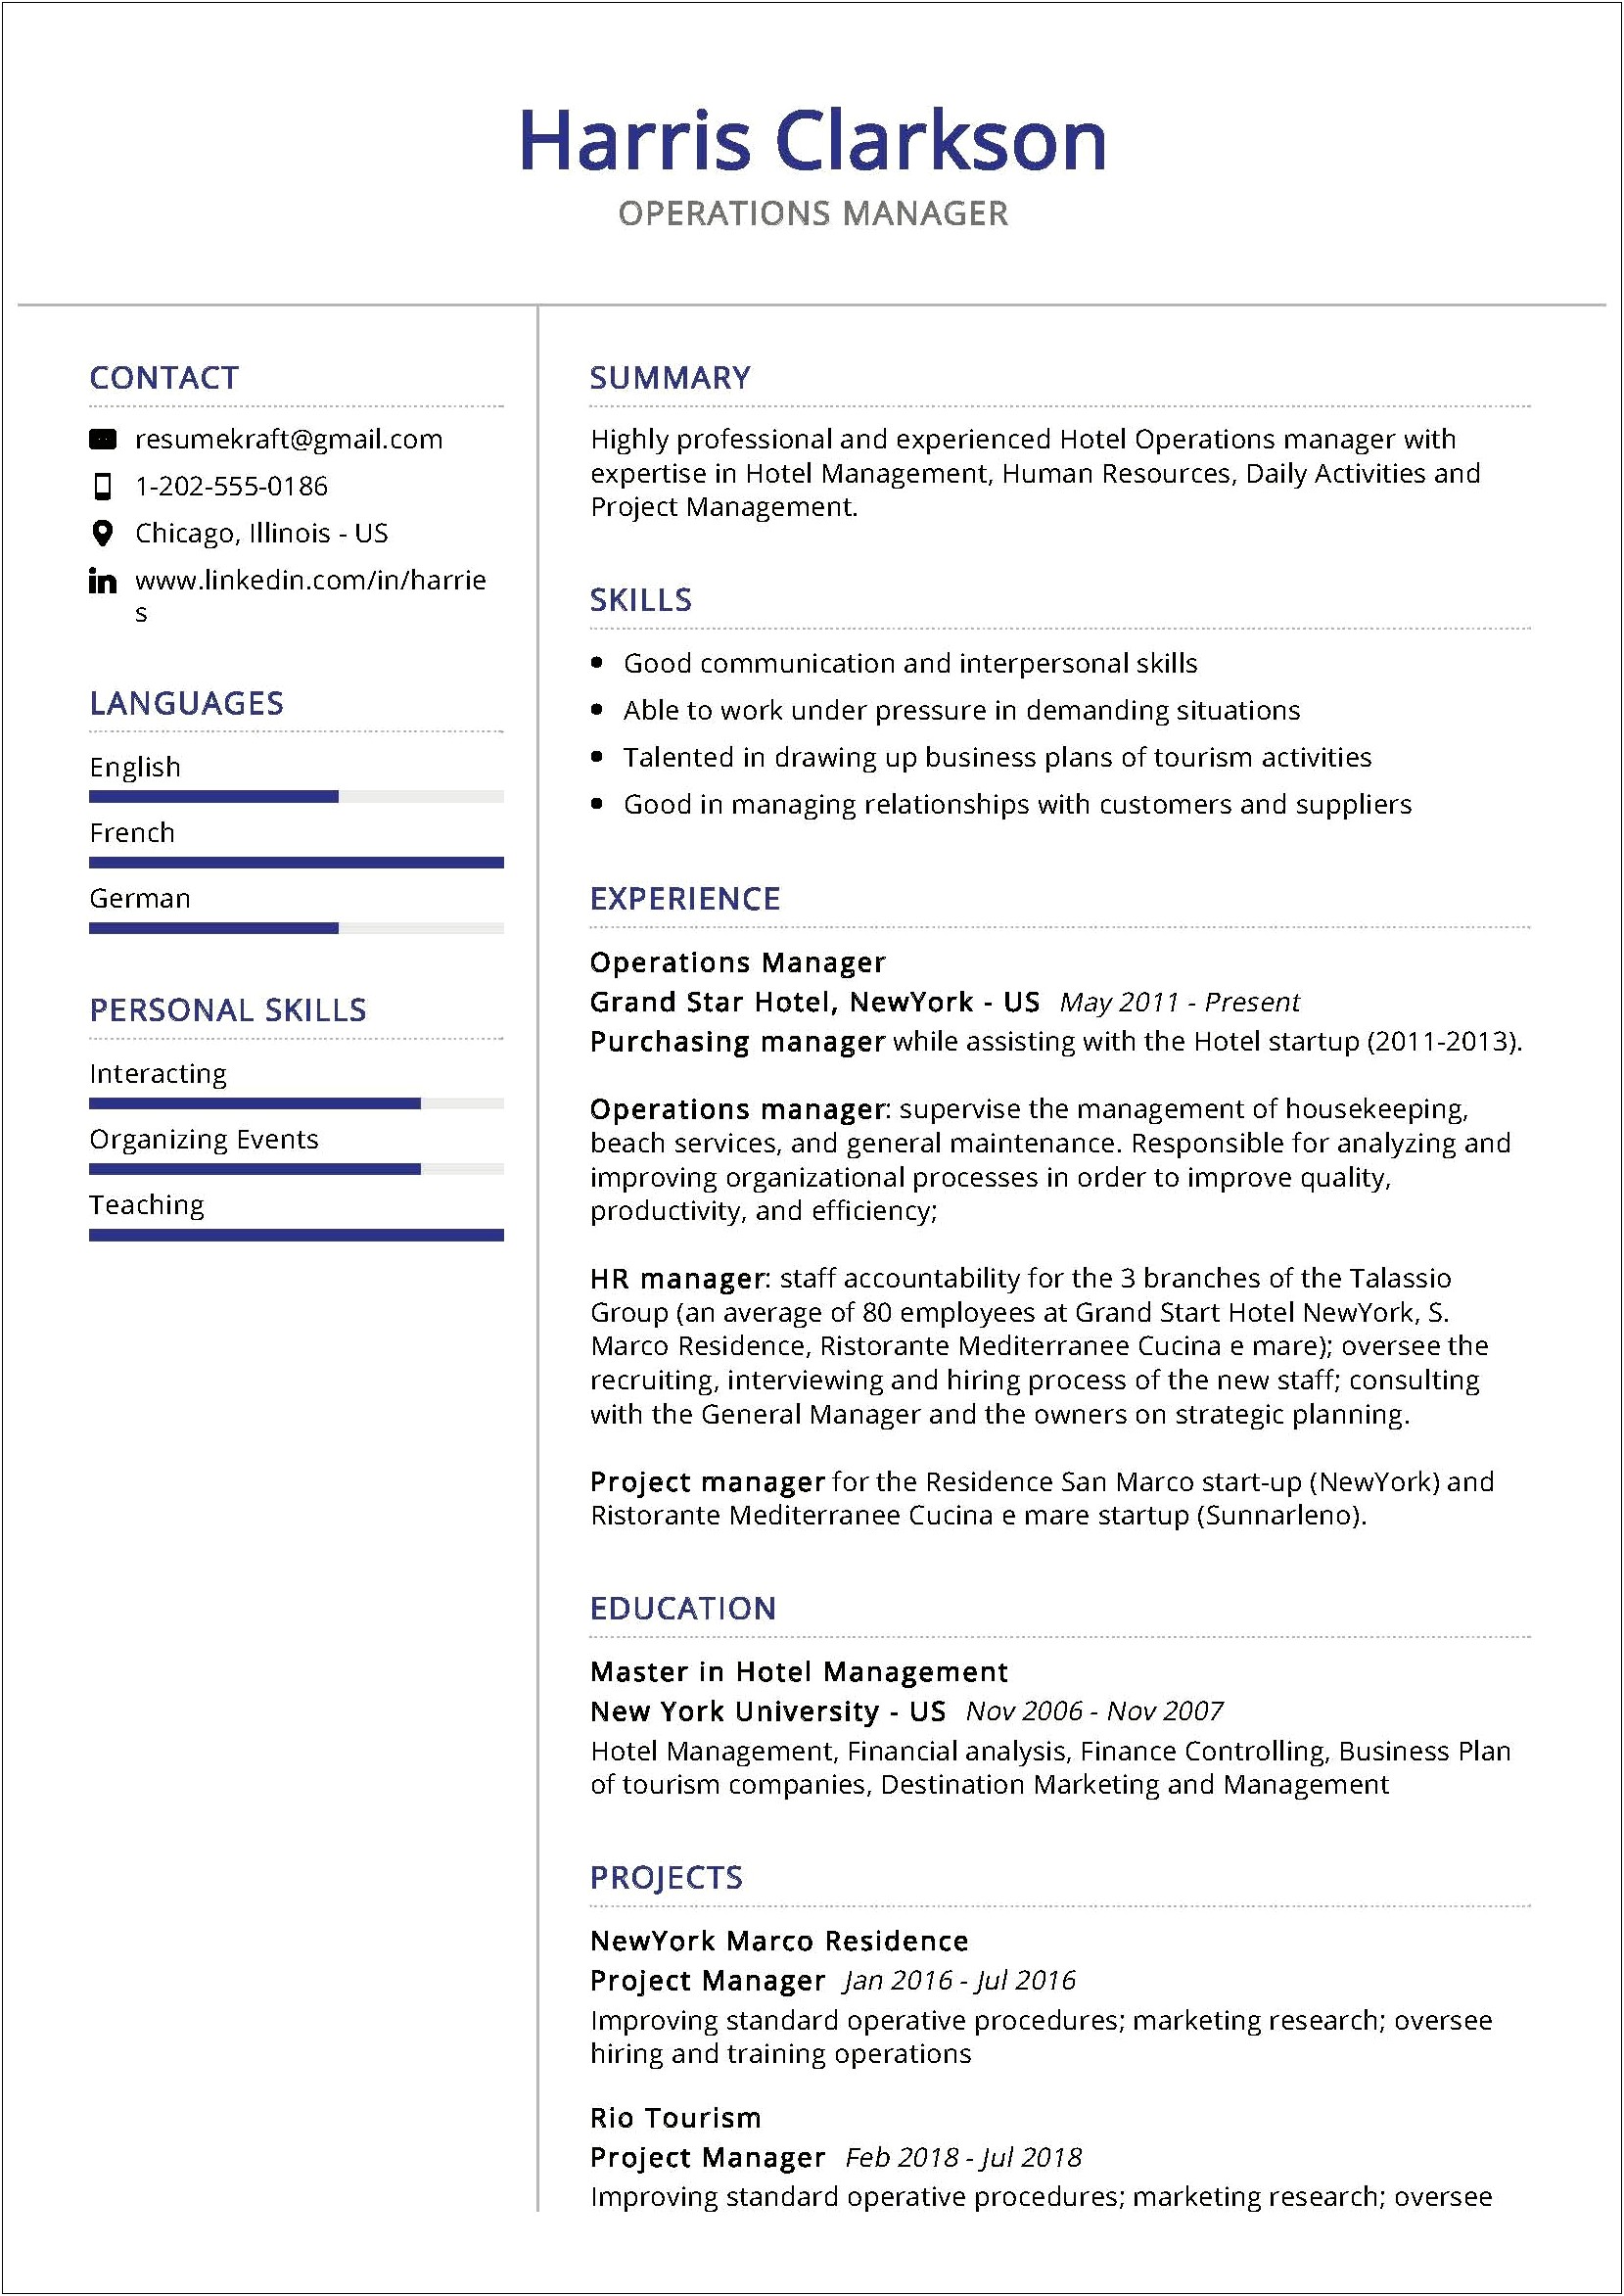 Resume For Tour Operations Manager